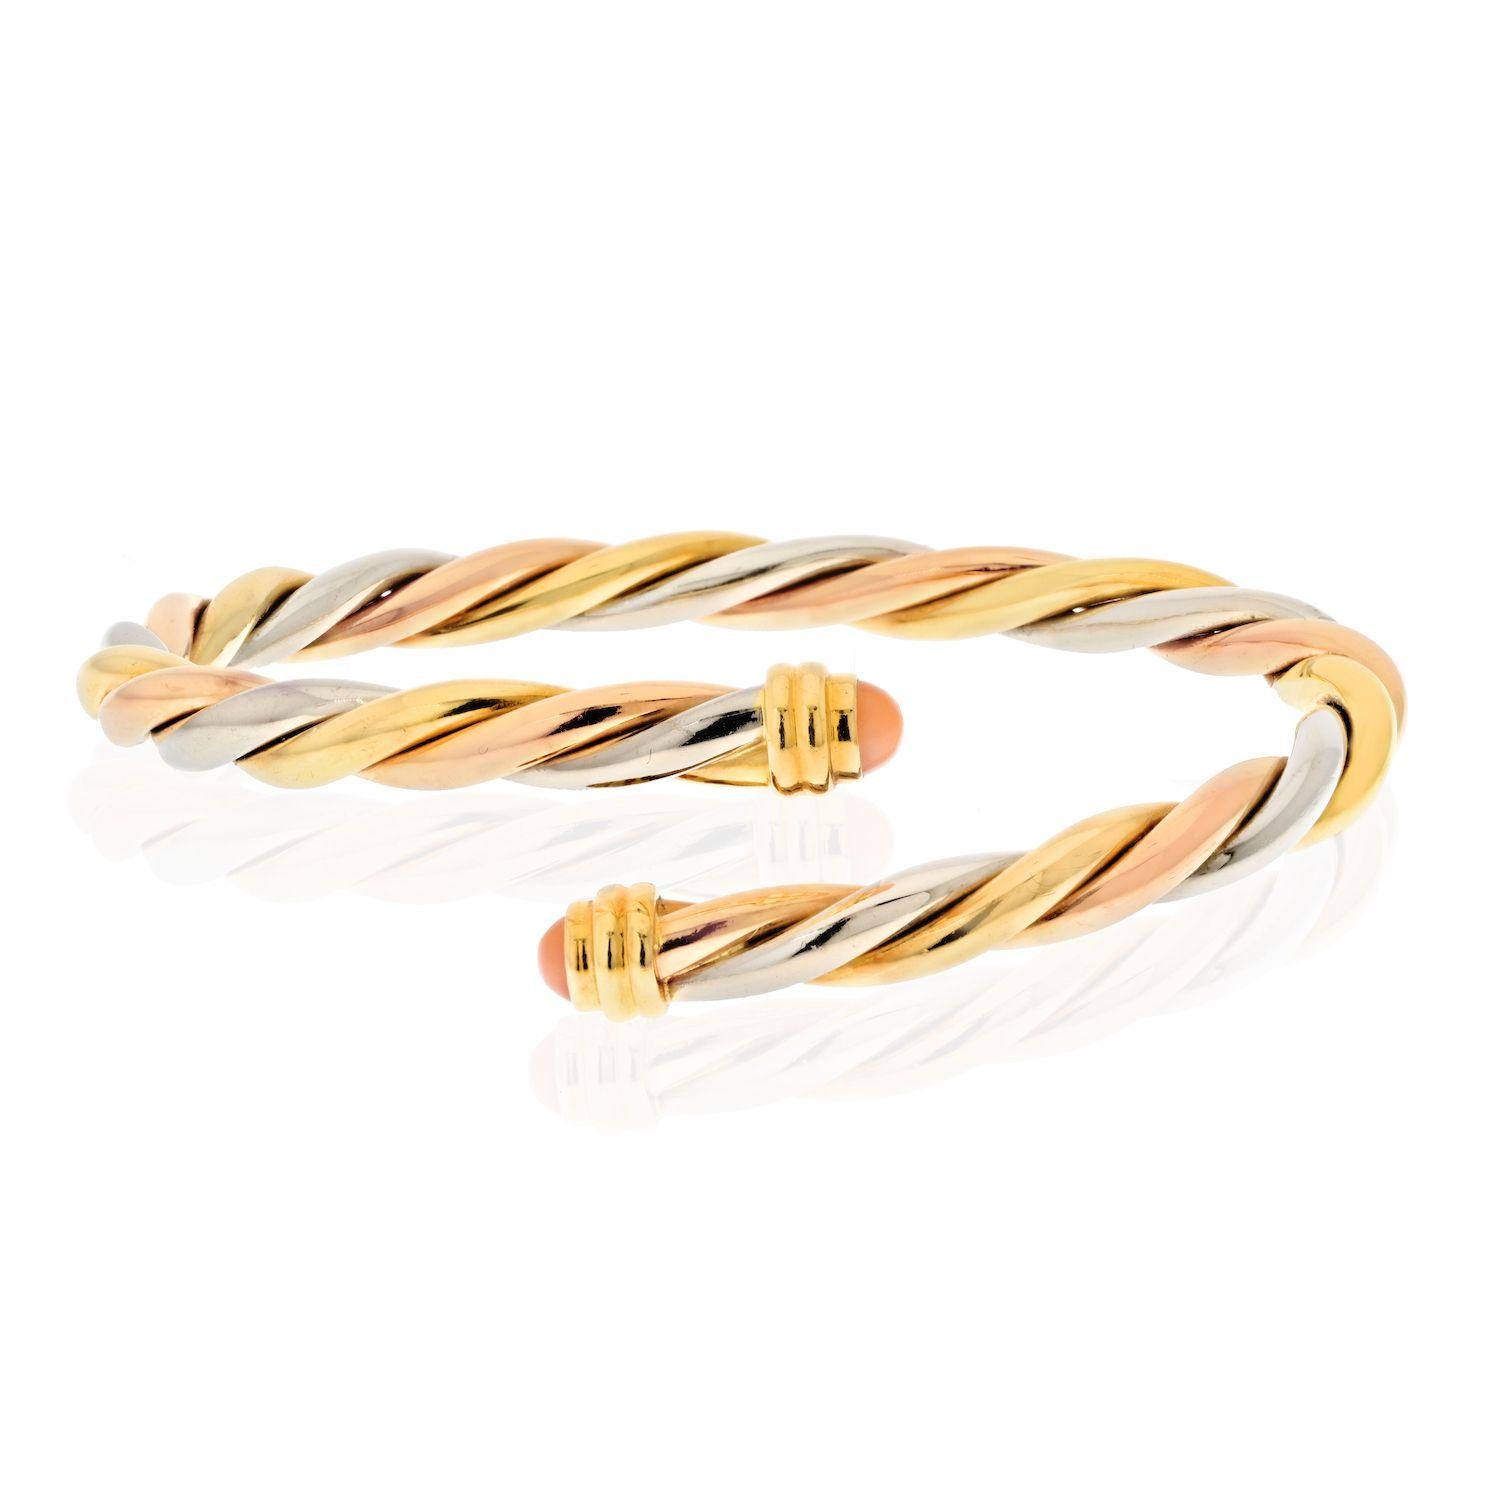 This Cartier vintage bangle is made of three tone 18 karat gold, including yellow, white, and rose forms a twisted braid accented with coral cabochon ends. Wrist size 6.5 inches. EU size 17cm. 